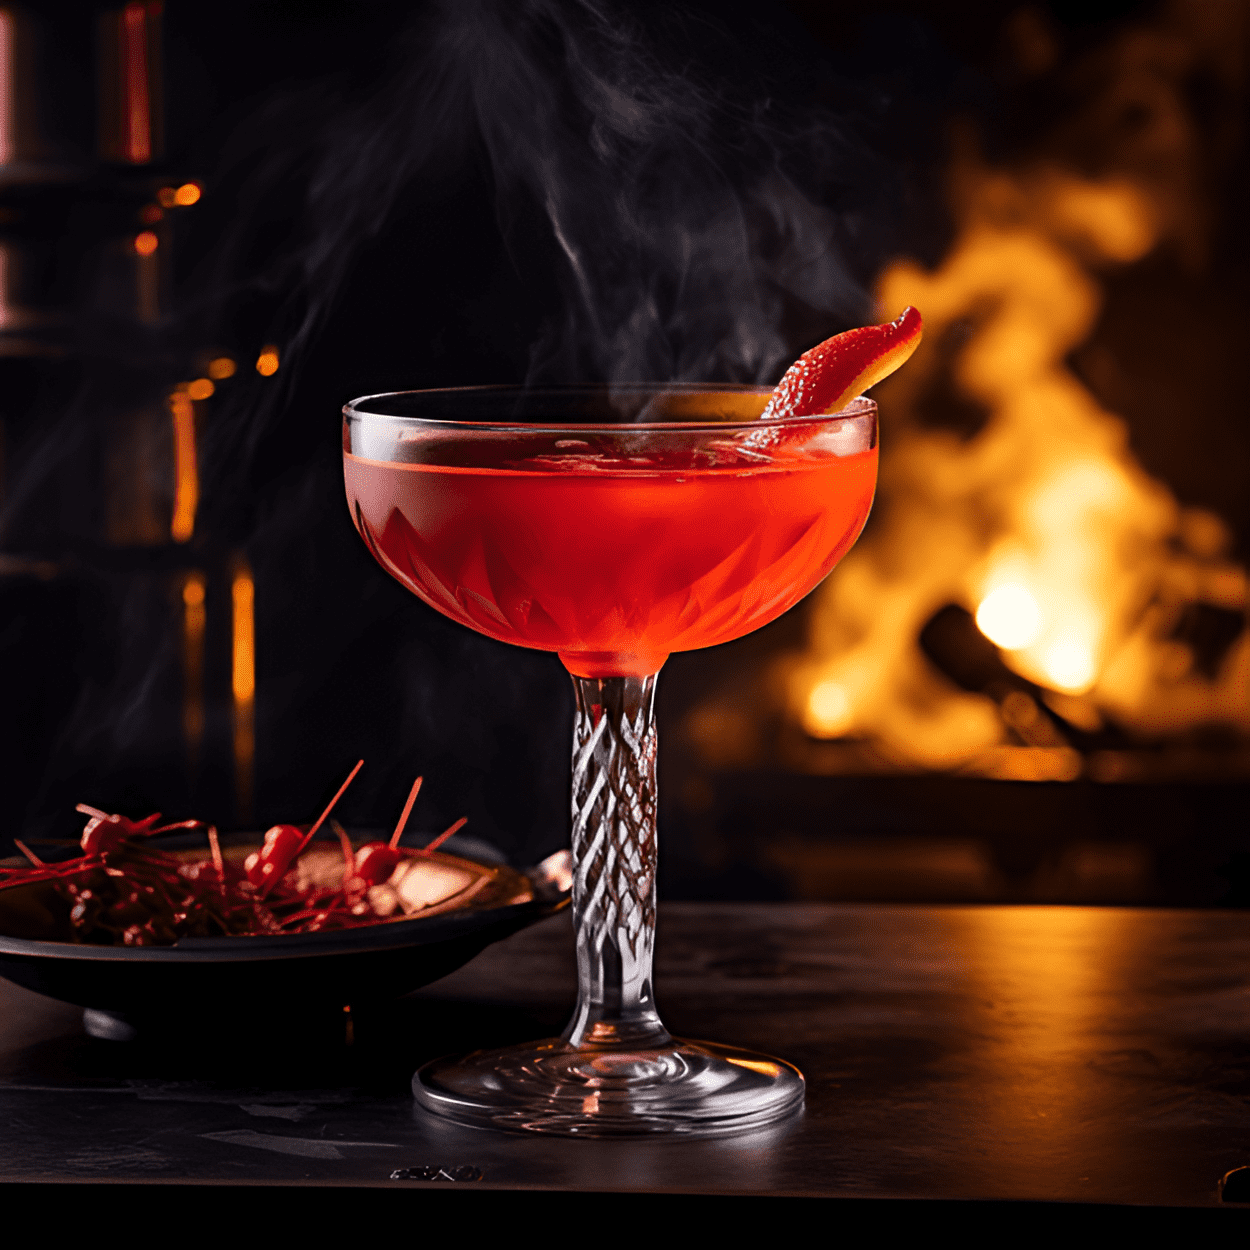 Tango Cocktail Recipe - The Tango cocktail has a well-balanced, slightly sweet and tangy taste. It is light and refreshing, with a subtle citrus flavor and a hint of bitterness from the Campari.